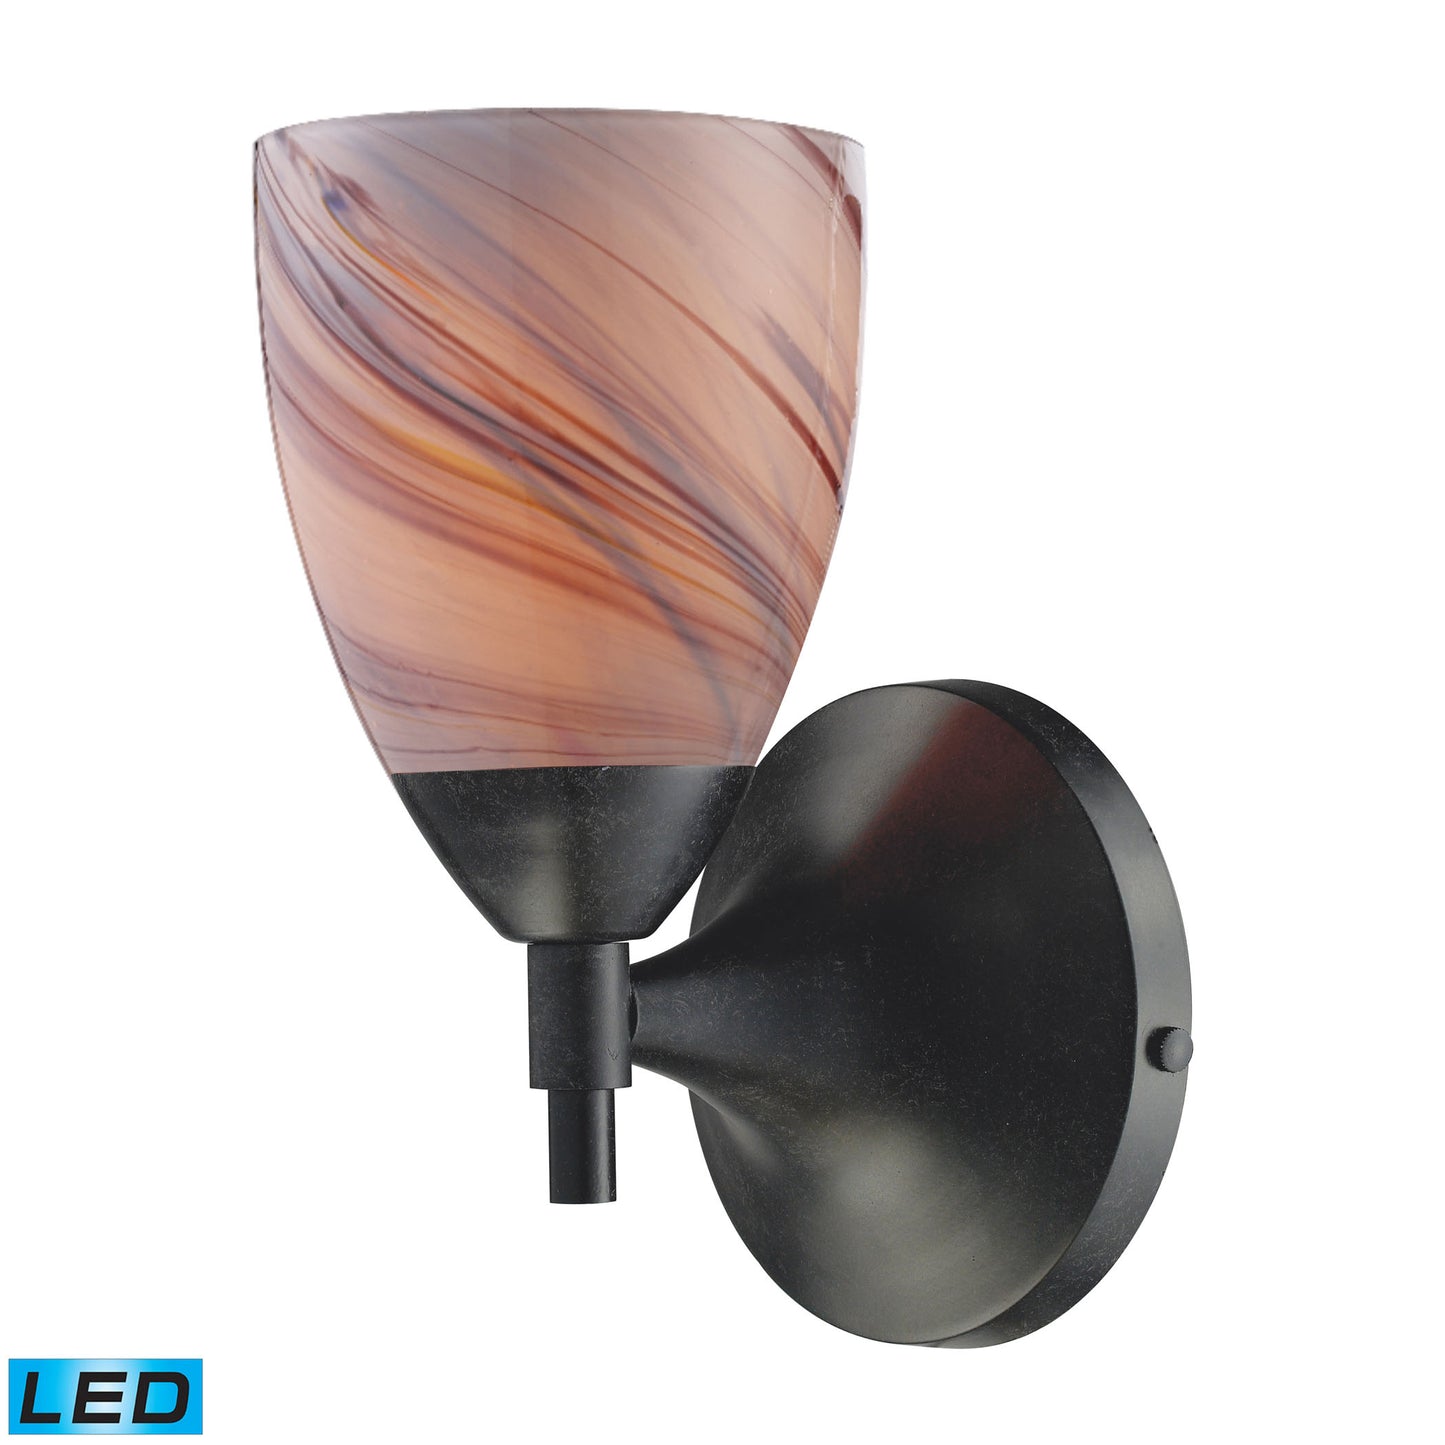 Celina 1-Light Wall Lamp in Dark Rust with Creme Glass - Includes LED Bulb